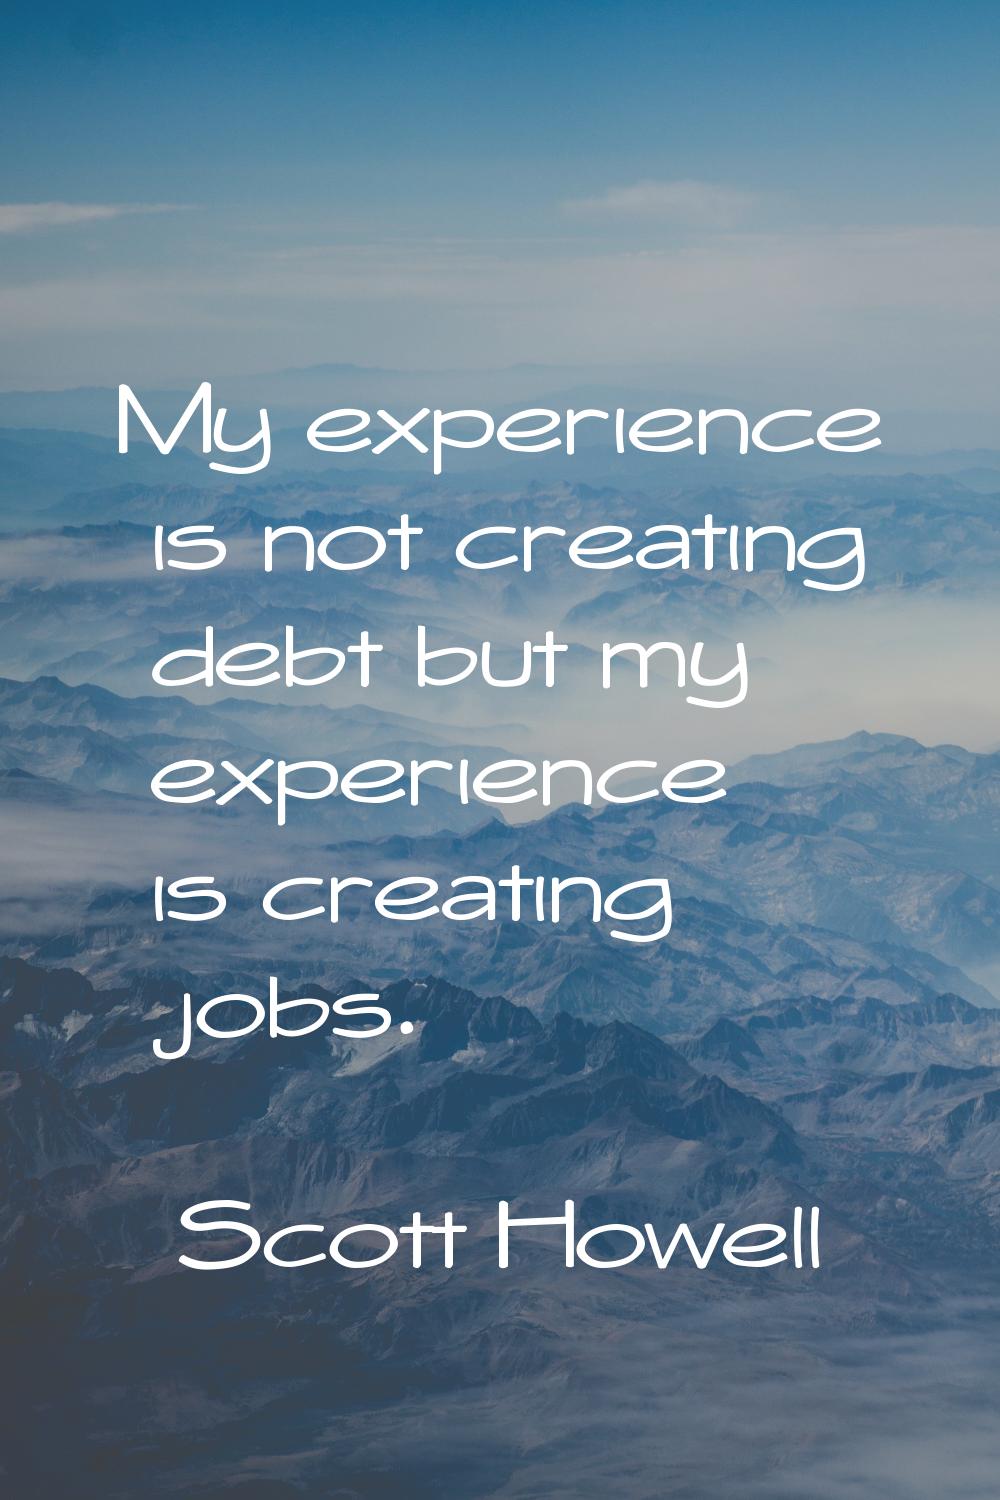 My experience is not creating debt but my experience is creating jobs.